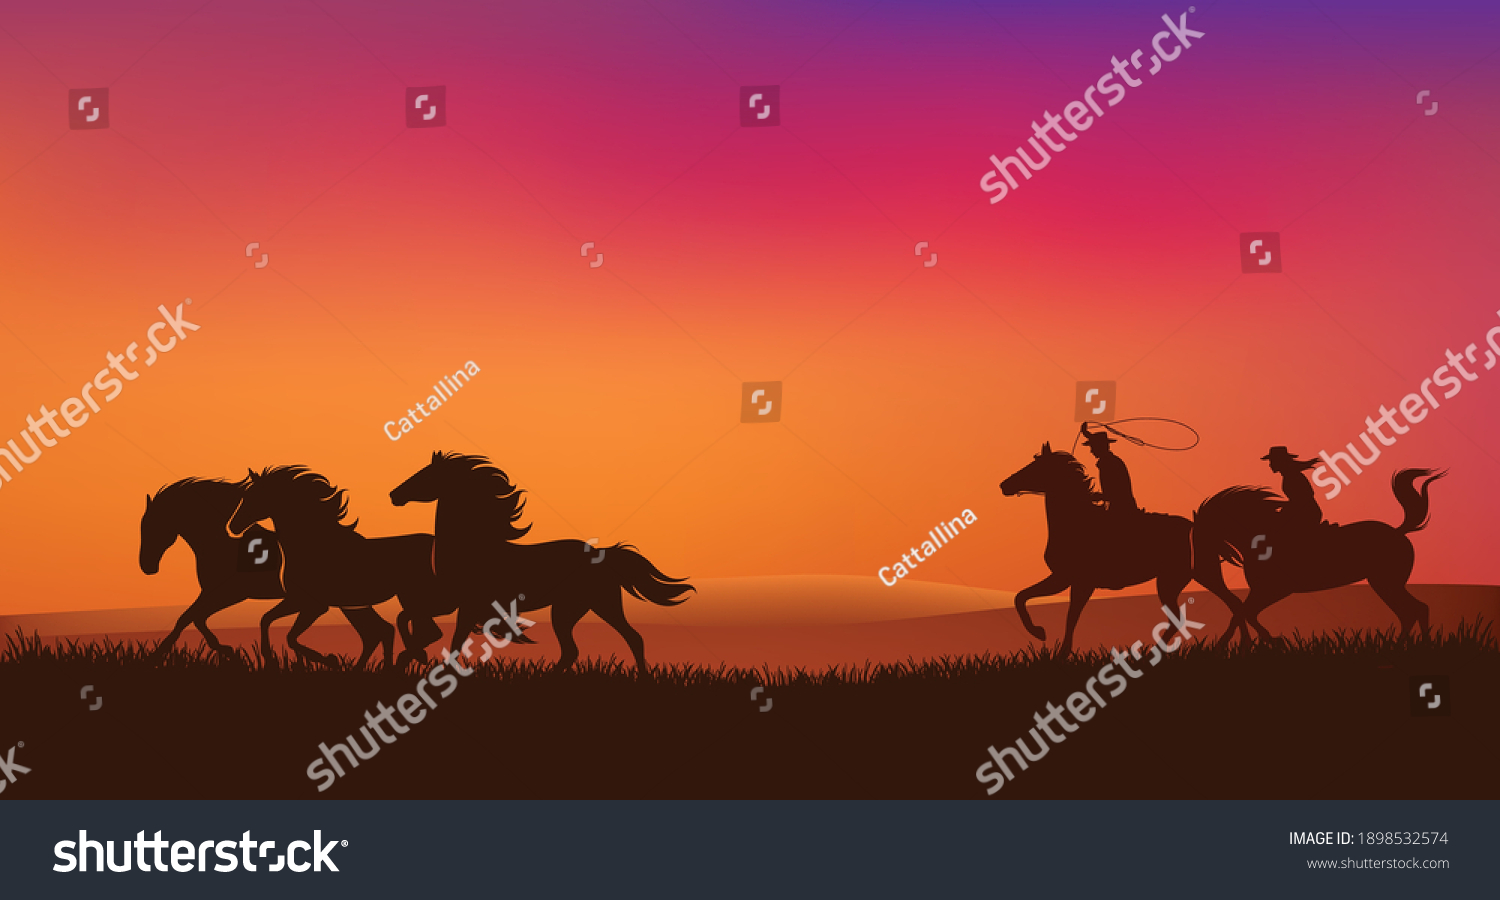 SVG of cowboy and cowgirl riders chasing mustang horses herd and throwing lasso - romantic wild west sunset landscape scene vector silhouette design svg